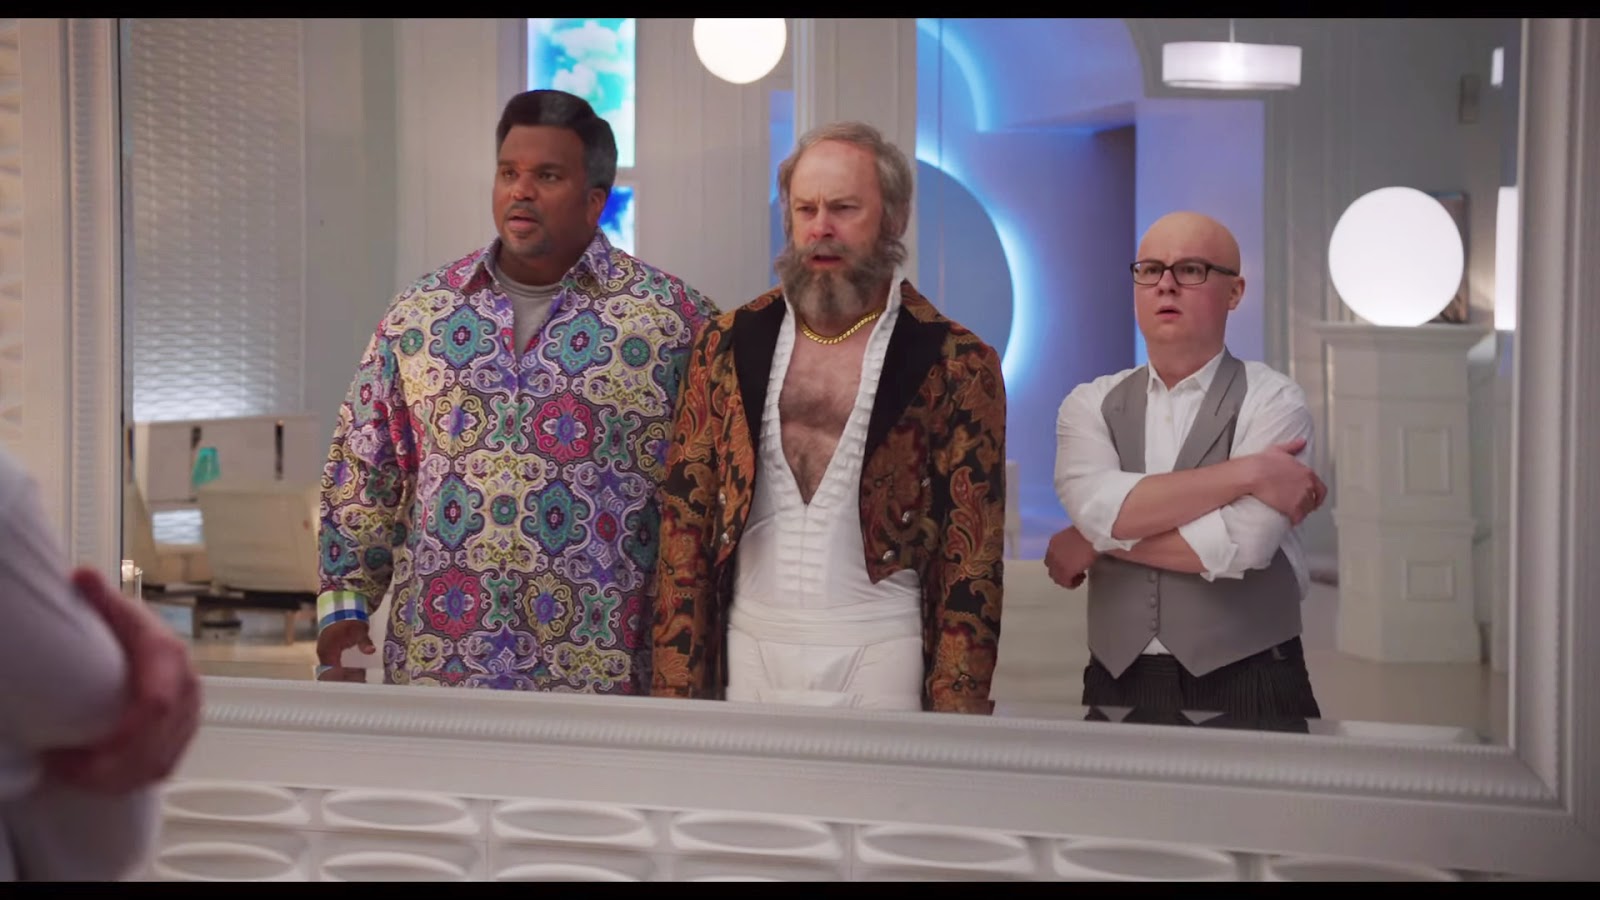 Hot Tub Time Machine 2 Was Not A Relaxing Second Dip Movie